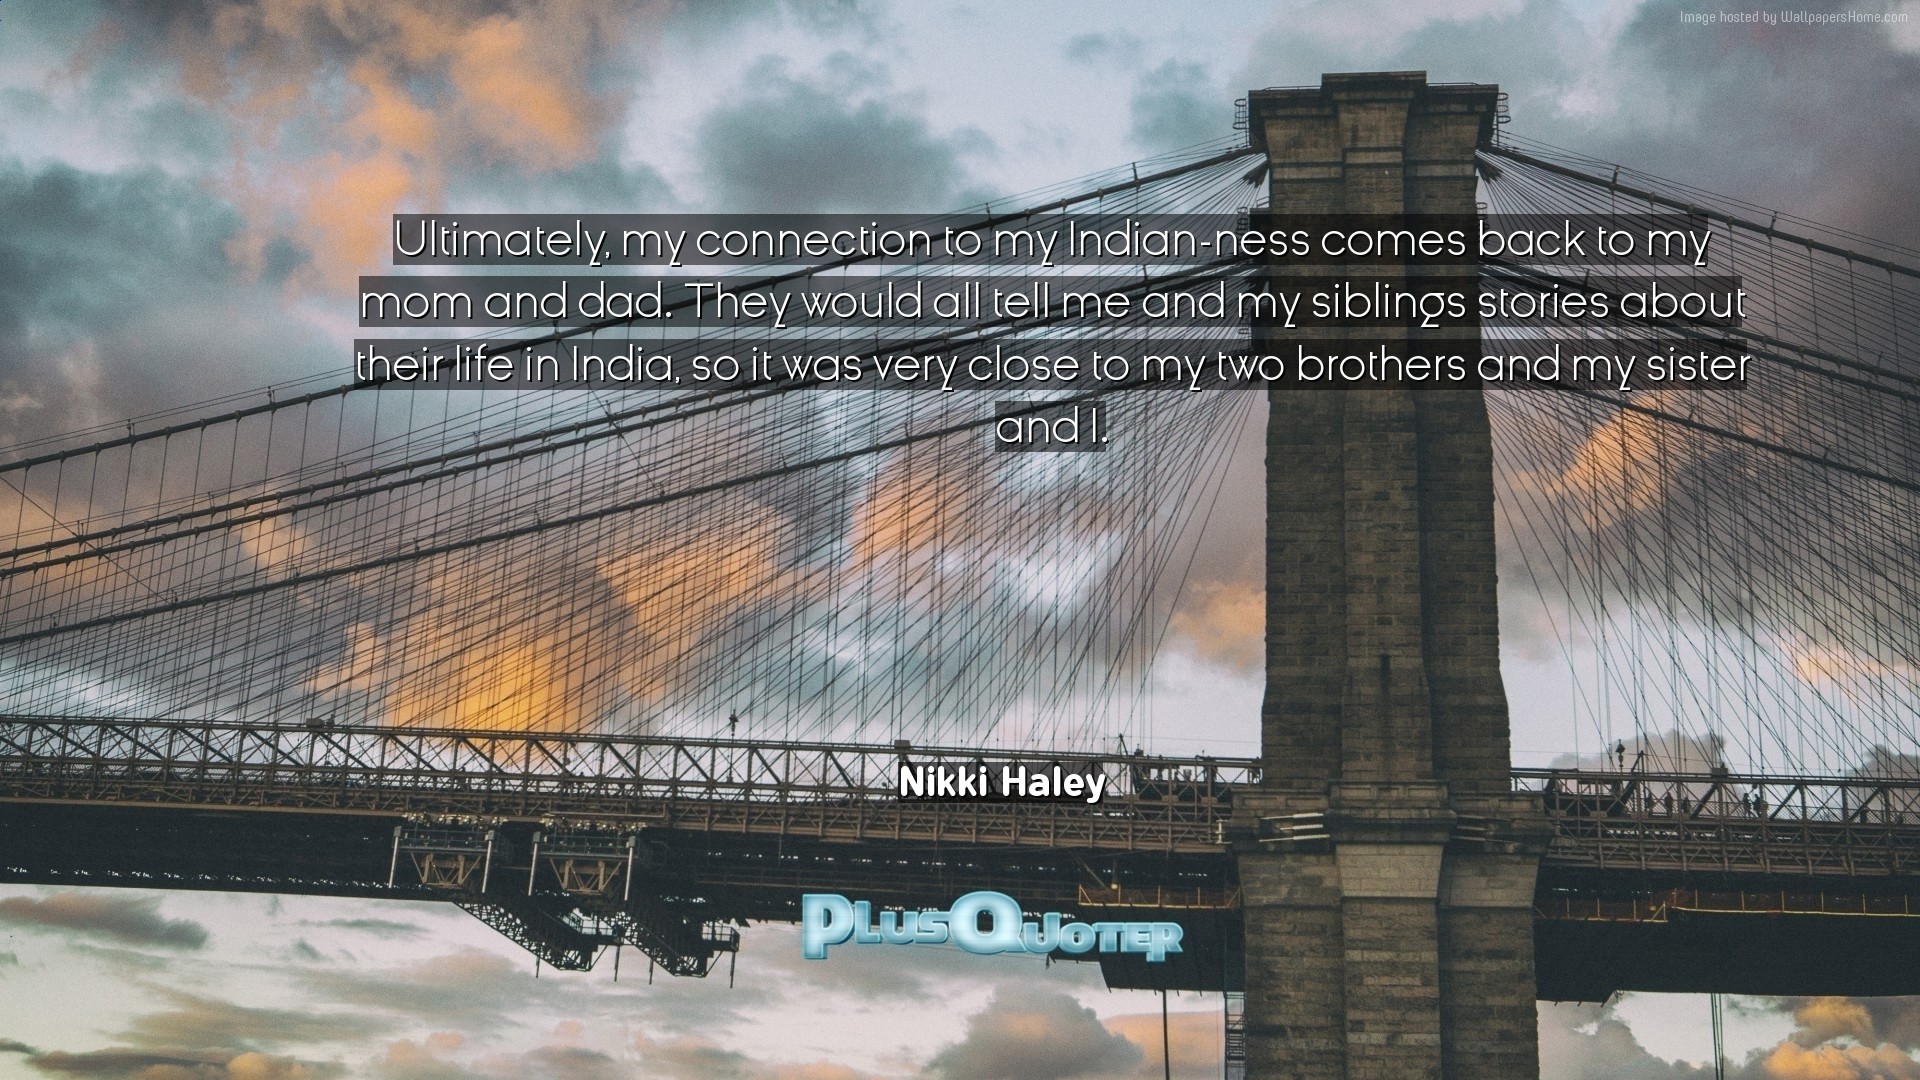 1920x1080 Download Wallpaper with inspirational Quotes- "Ultimately, my connection to  my Indian-ness. “